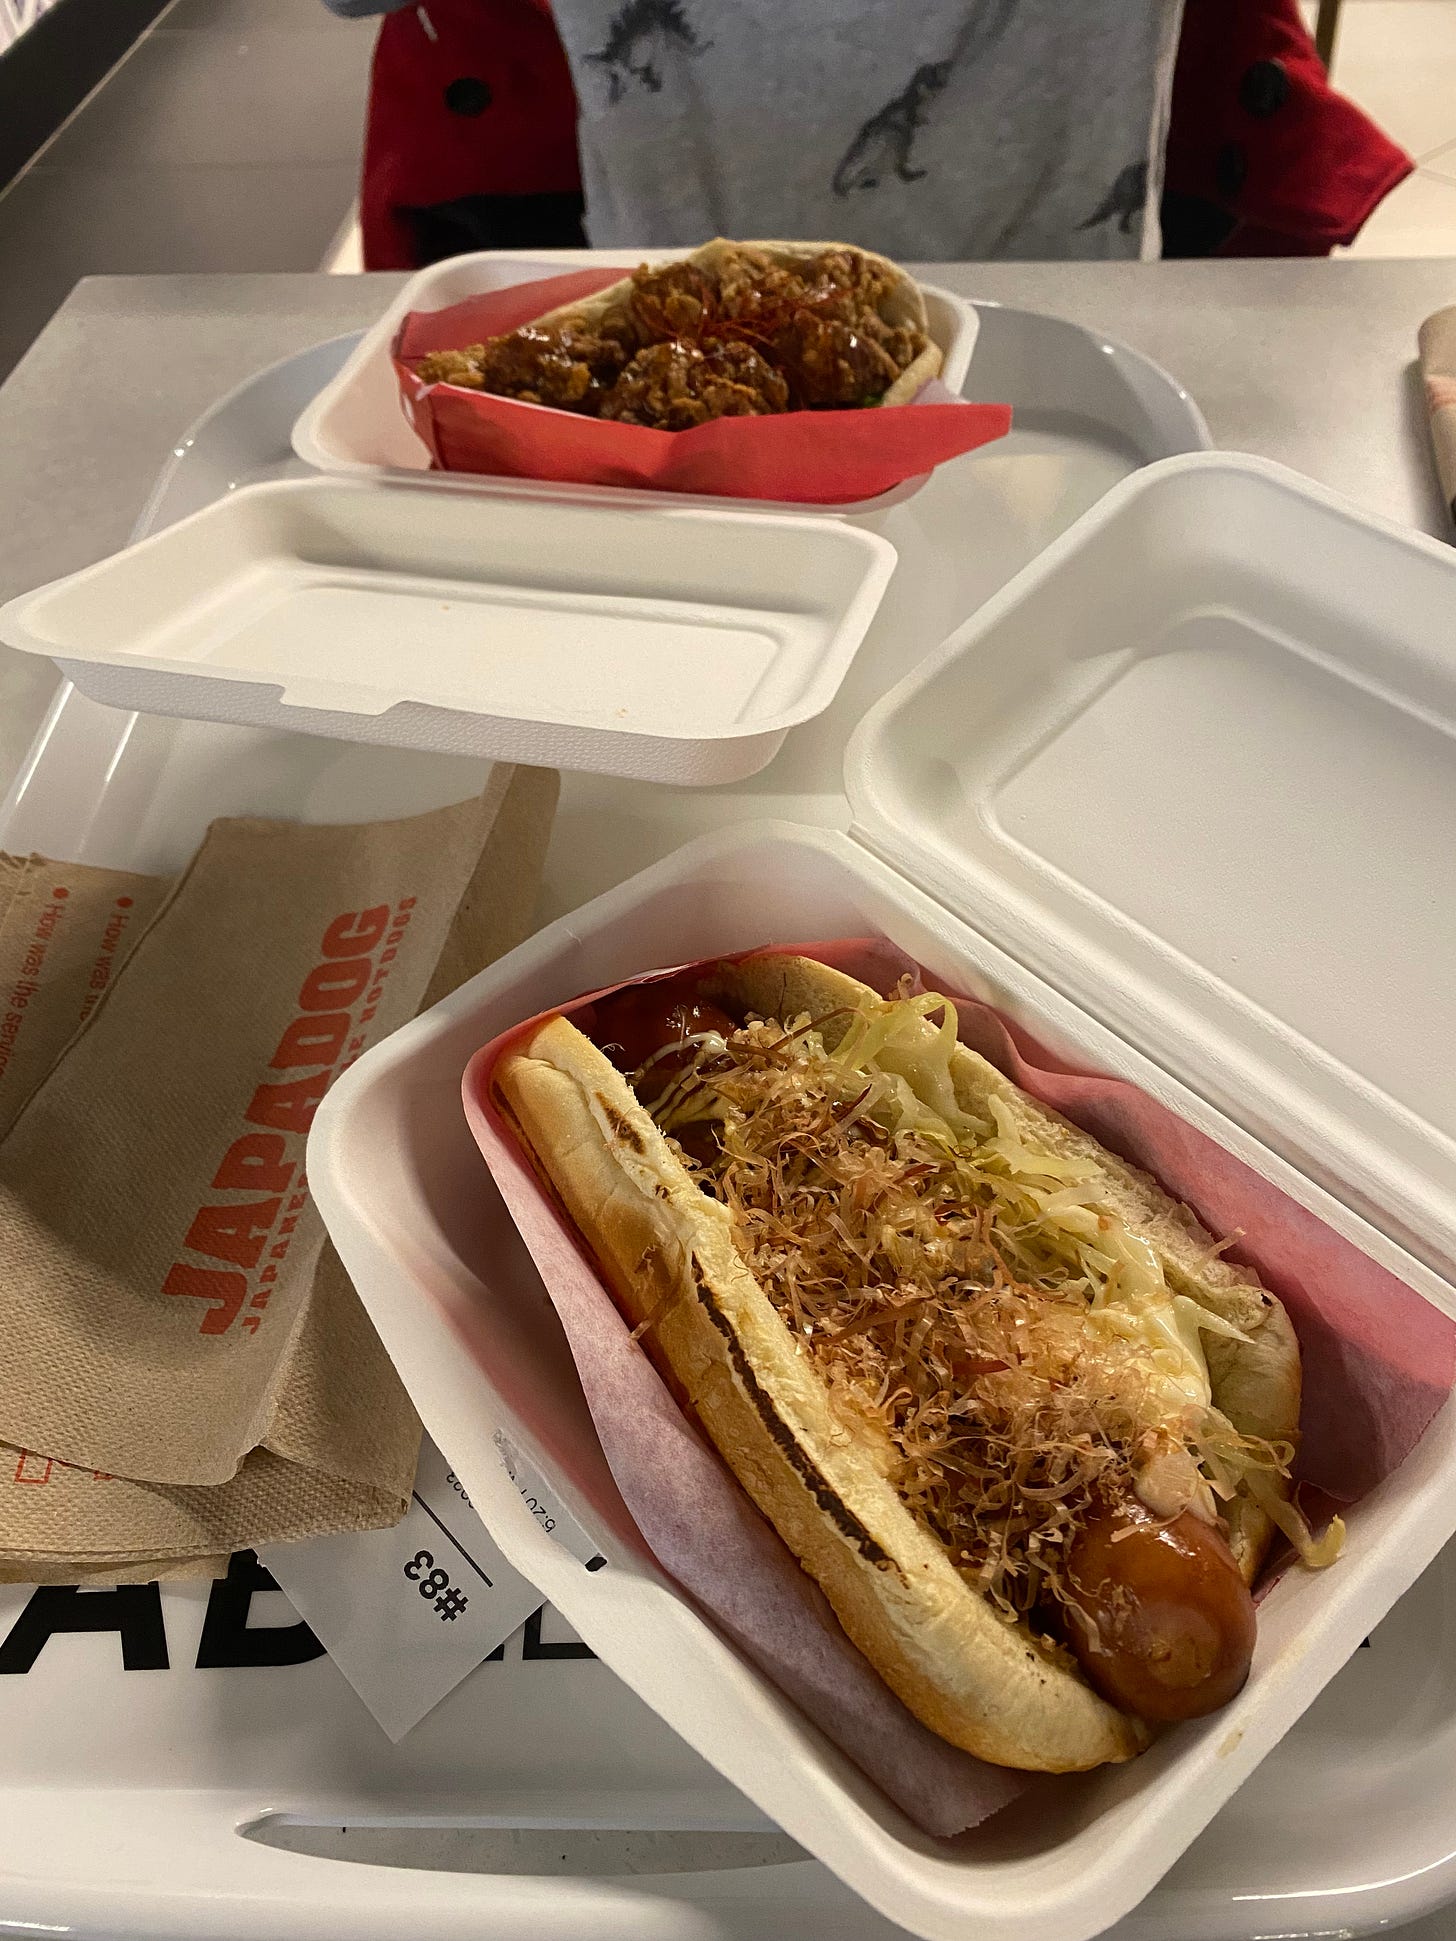 On a white tray are two white paper takeout containers, each with their own Japadog. In the foreground is mine, with bonito flakes and green cabbage. Steph's, with chicken karaage, is in the background. Brown napkins scattered on the tray read 'JAPADOG' in red block letters.